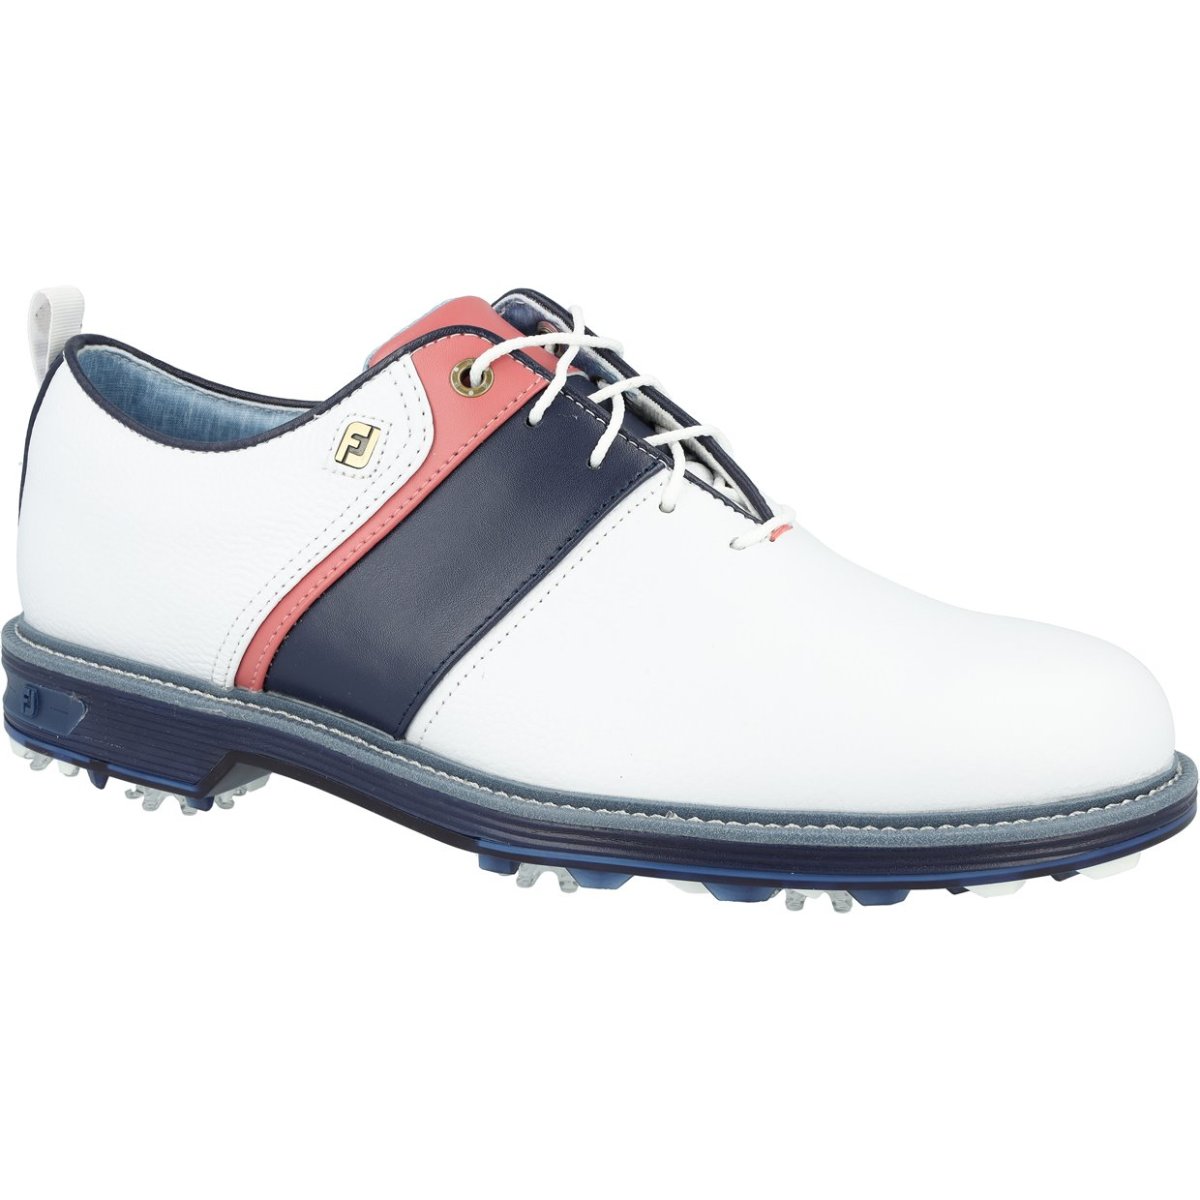 Shop the latest FootJoy shoes - like the Premiere Series Packard golf shoes - on Morning Read's online pro shop.